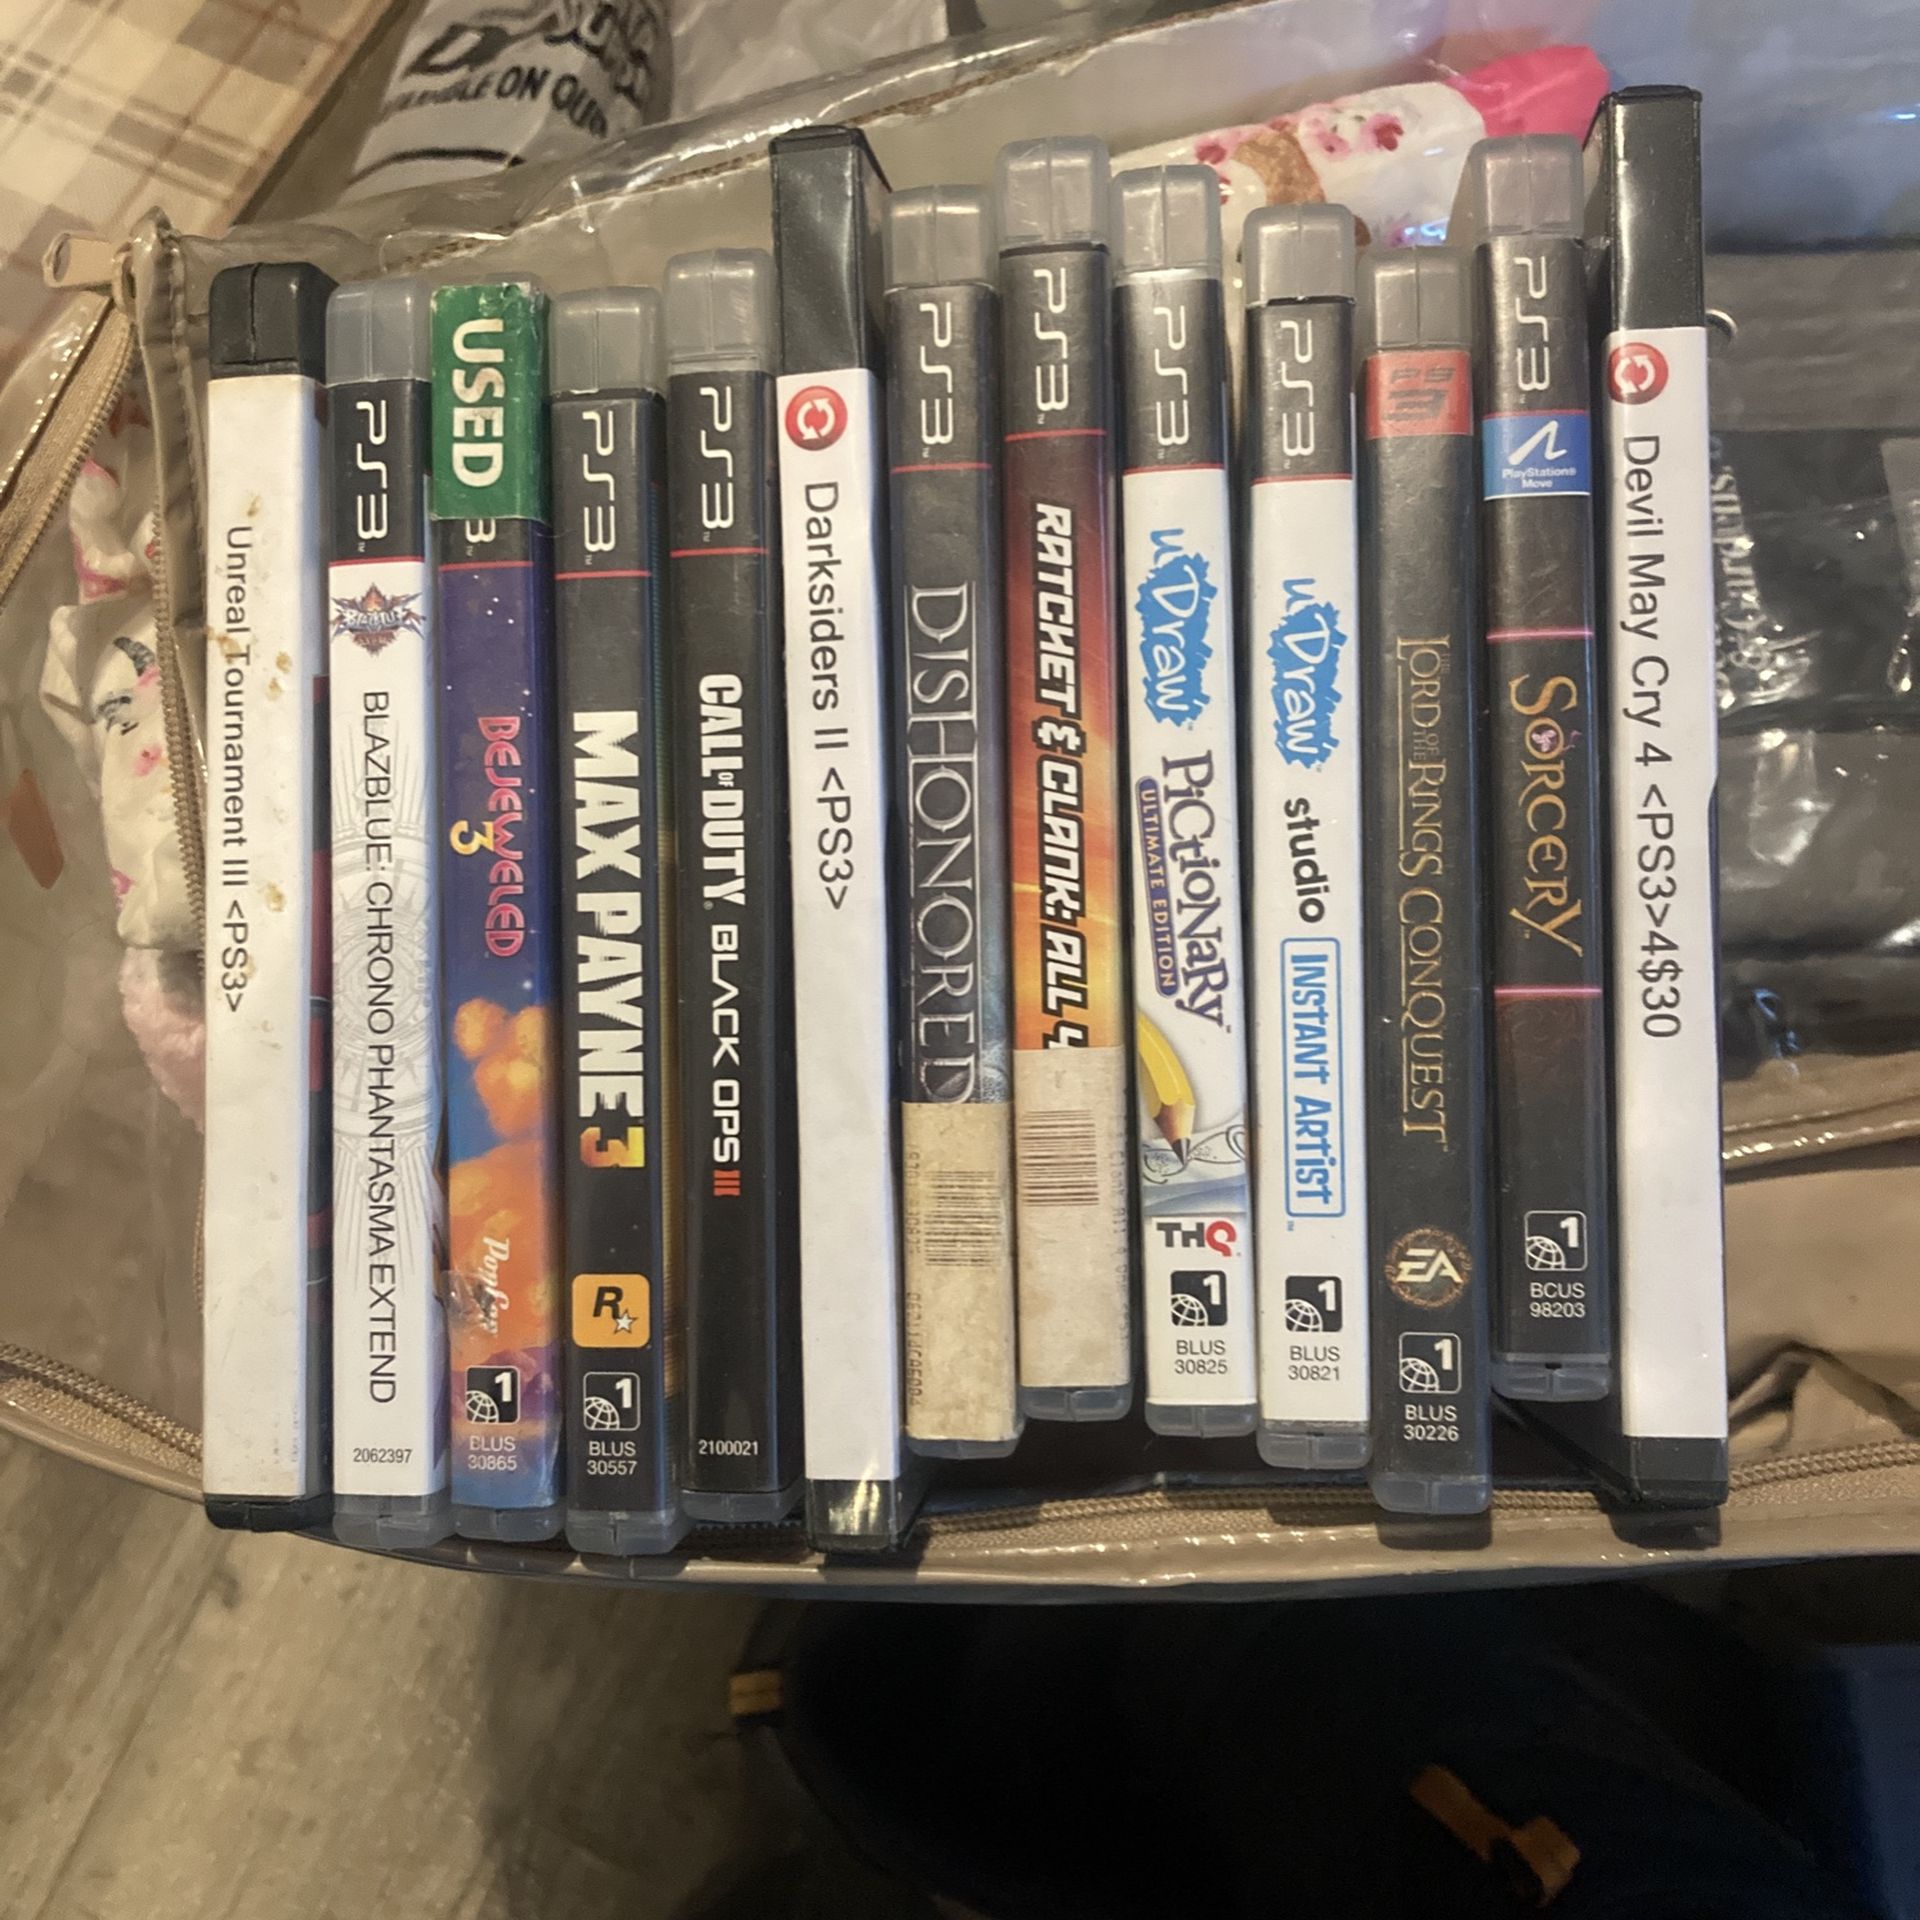 Dying Light Ps4 $10 for Sale in Bakersfield, CA - OfferUp